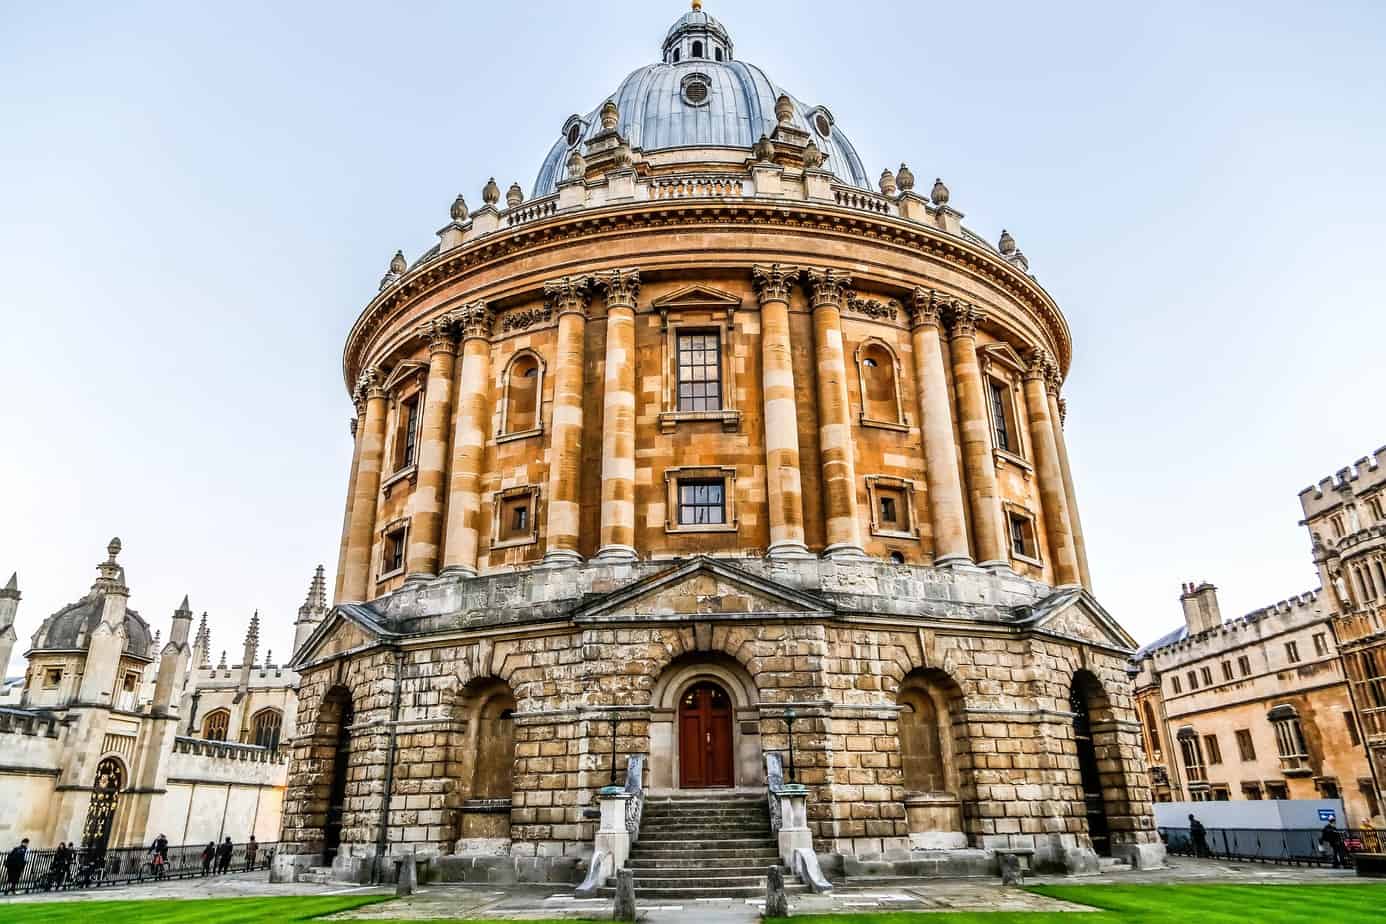 Image of The Bodleian in Oxford, England